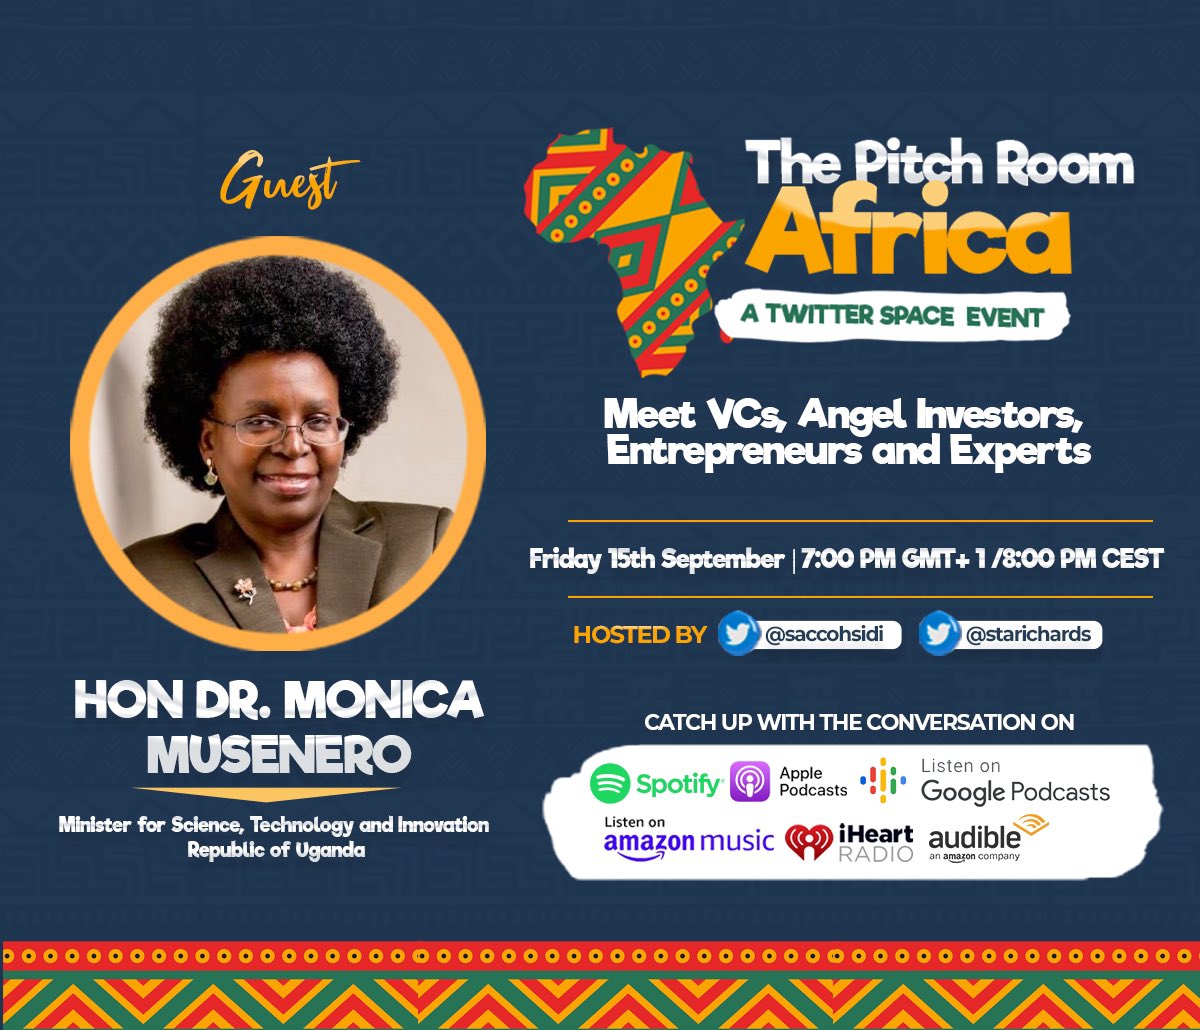 📣 Don’t miss the chance to hear directly from Hon @DrMusenero on Africa’s most hard-hitting tech podcast! We’re diving deep into Uganda’s rising startup scene & its link to the wider African ecosystem. 🗓️ Fri, Nov 15, 7:00 PM GMT+1 🔗 Sign Up Now twitter.com/i/spaces/1LyxB……